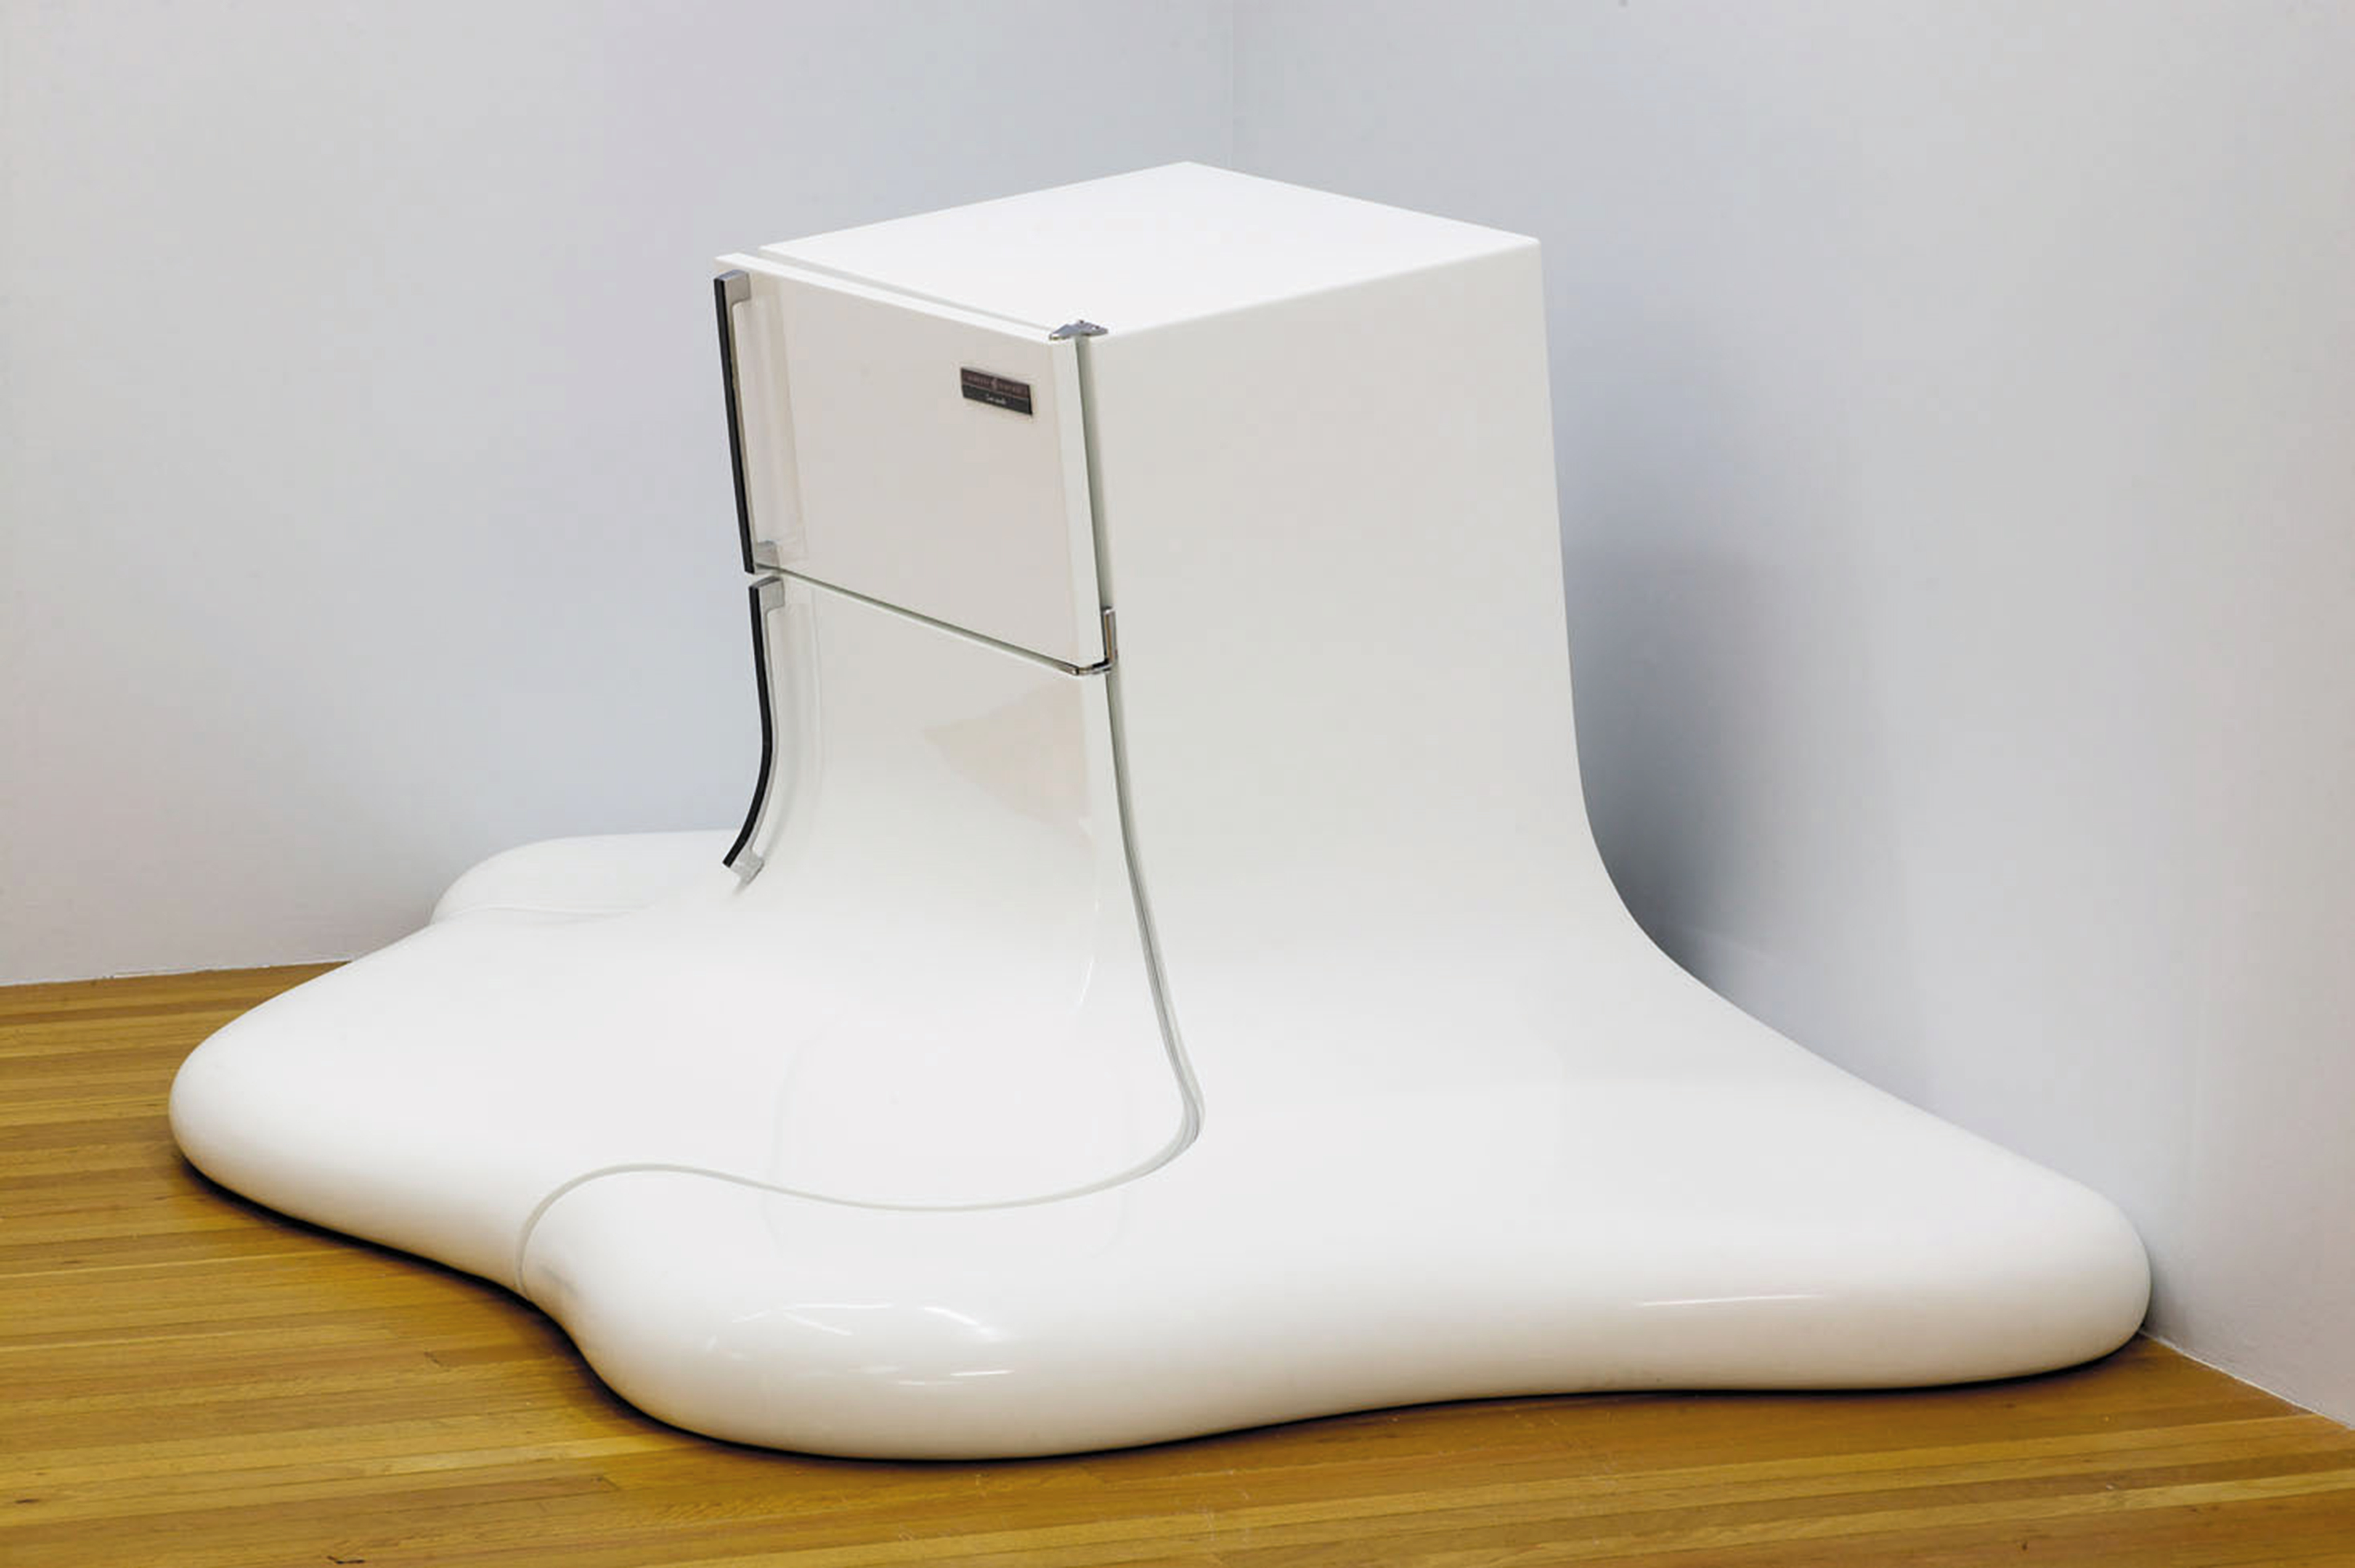 A sulpture of a fridge that looks liek it is melting into the floor by artist Christian de Vietri.